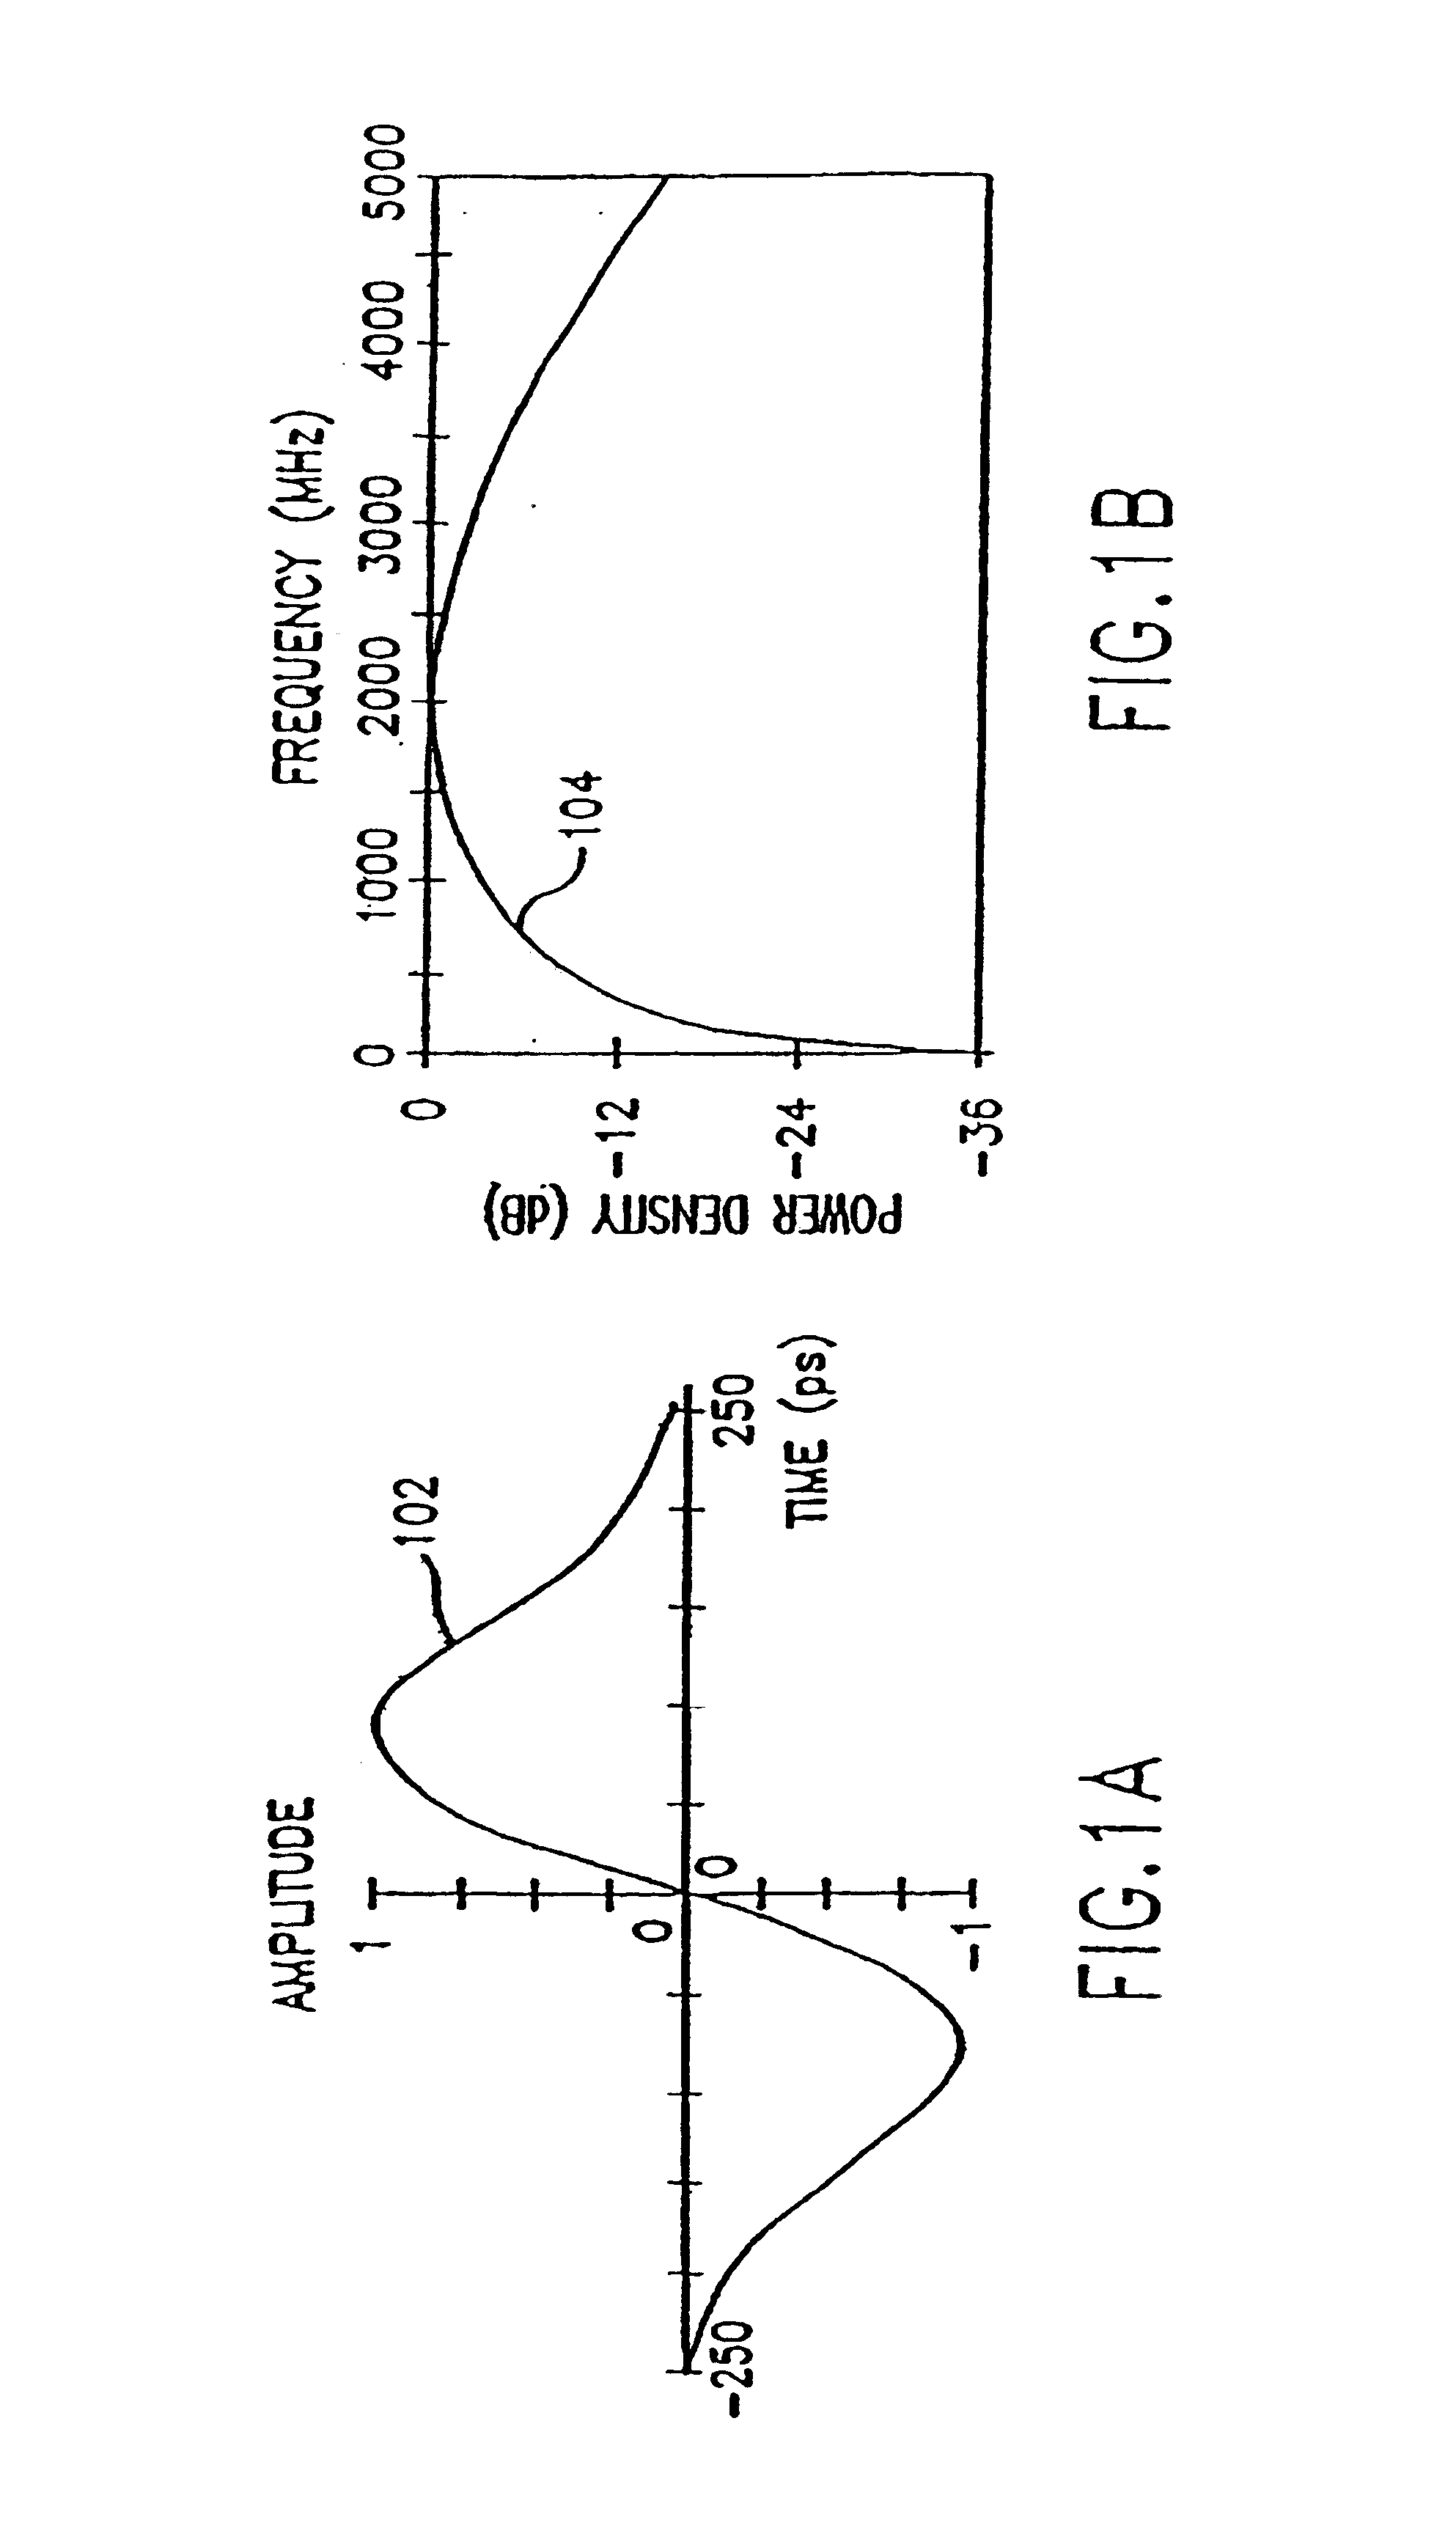 Method for mitigating effects of interference in impulse radio communication